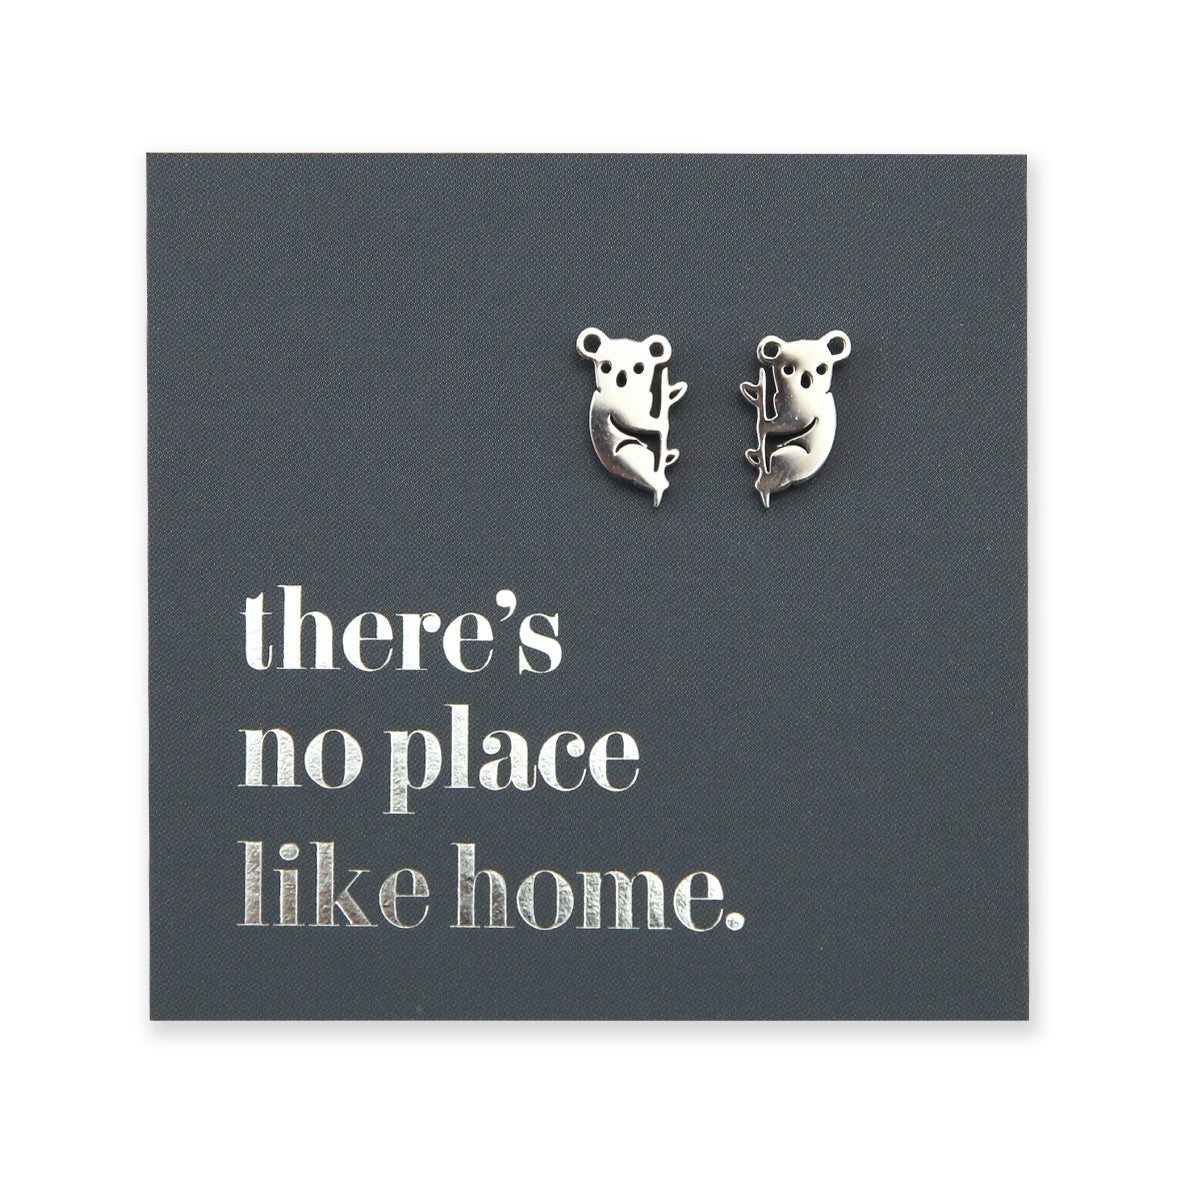 Stainless Steel Earring Studs No Place Like Home KOALAS gold, silver, rose gold, black